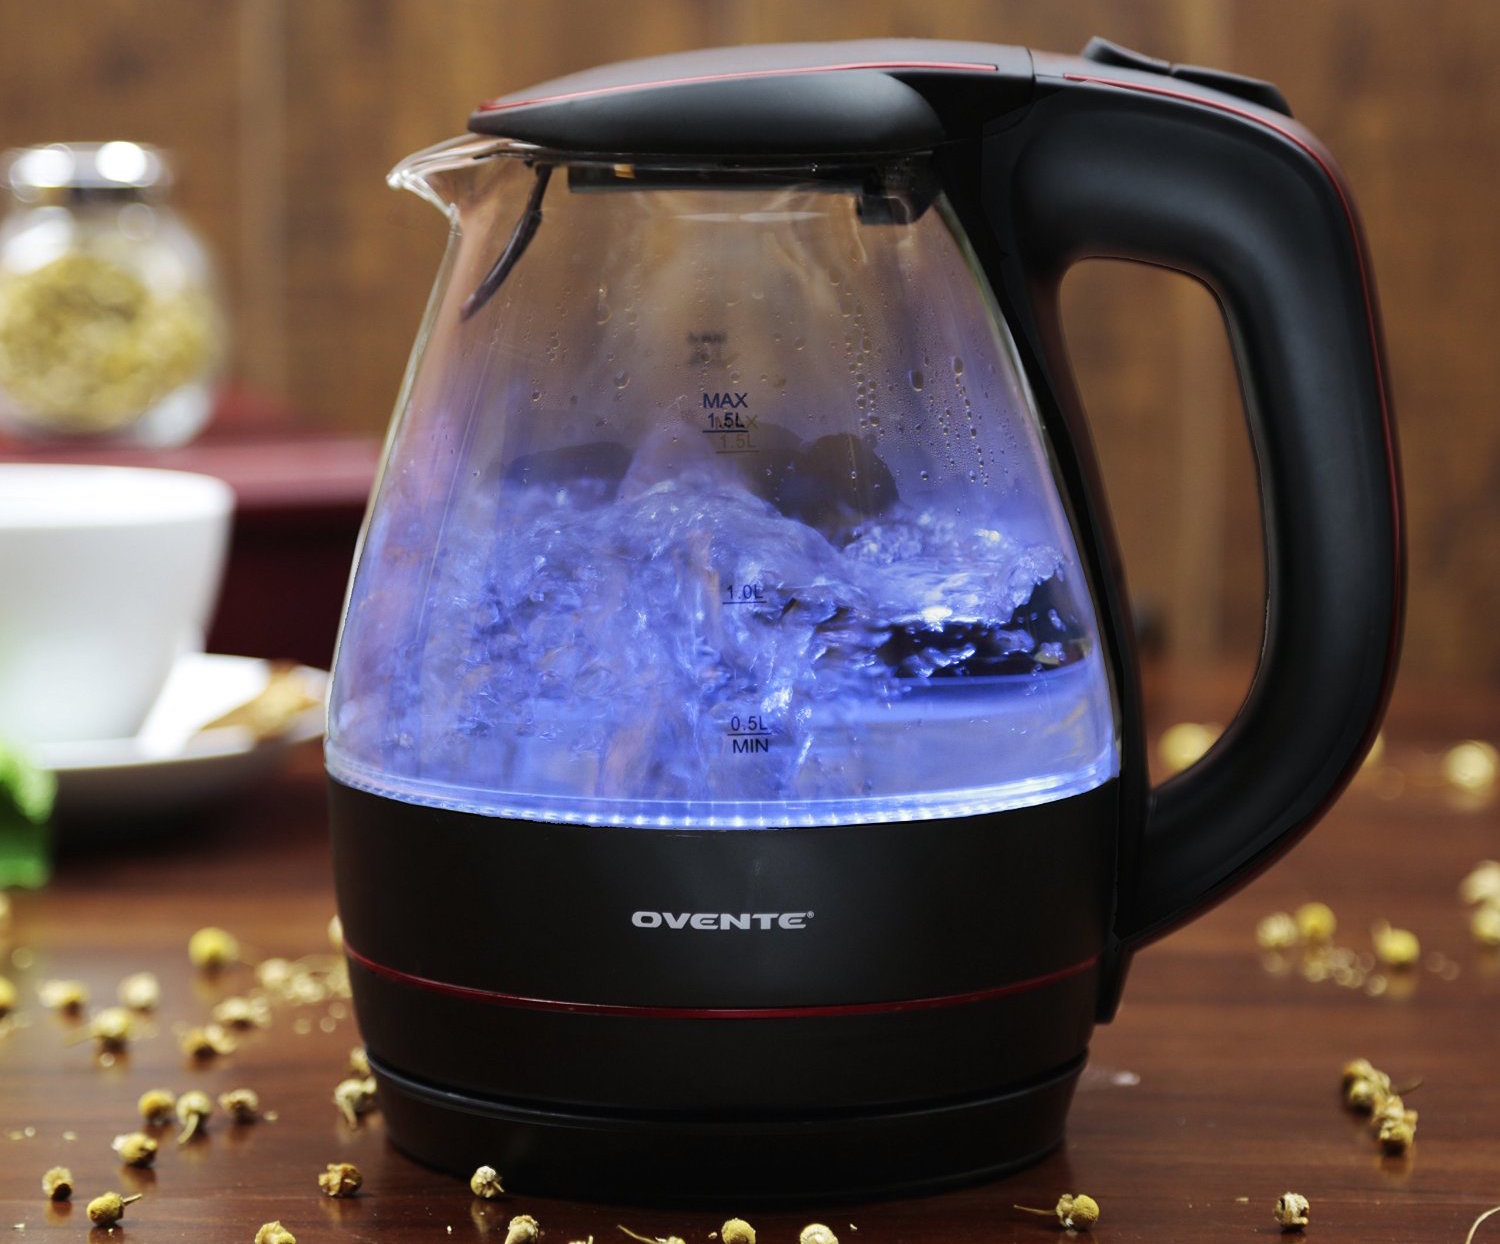 https://9to5toys.com/wp-content/uploads/sites/5/2015/07/ovente-glass-electric-kettle-kg83b-sale-01.jpg